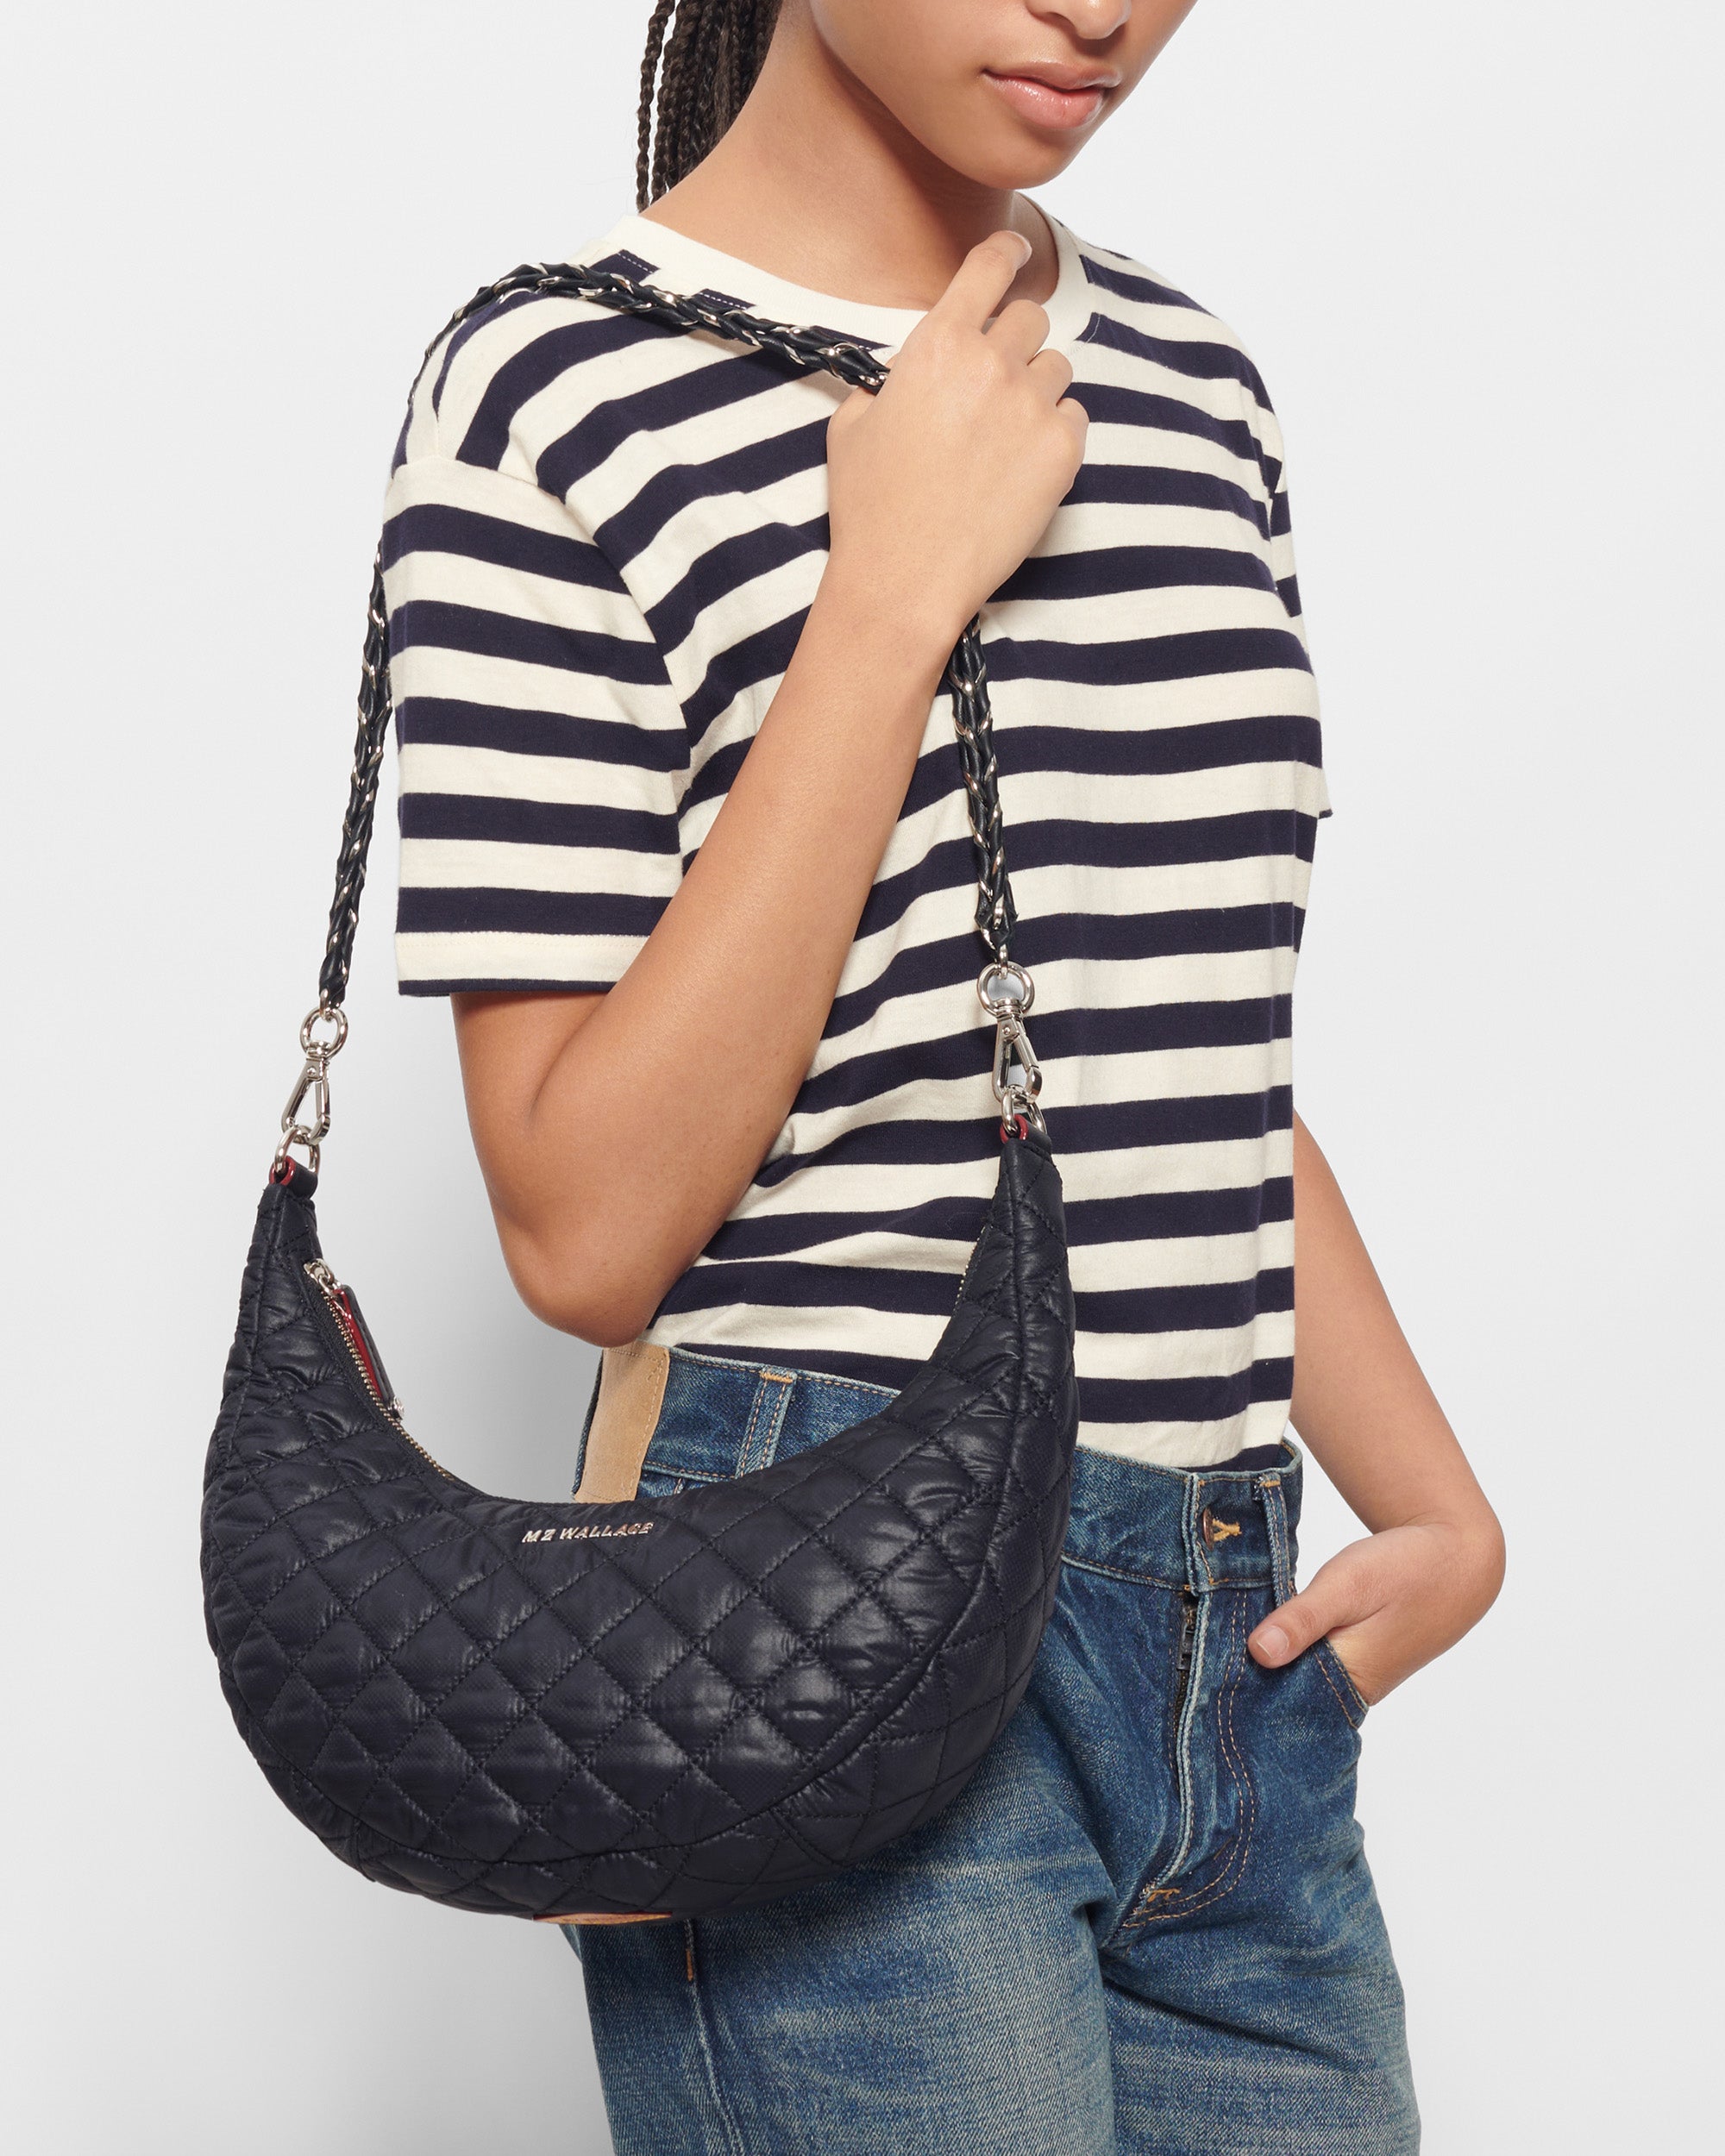 MZ Wallace Crosby Quilted Nylon Hobo Bag